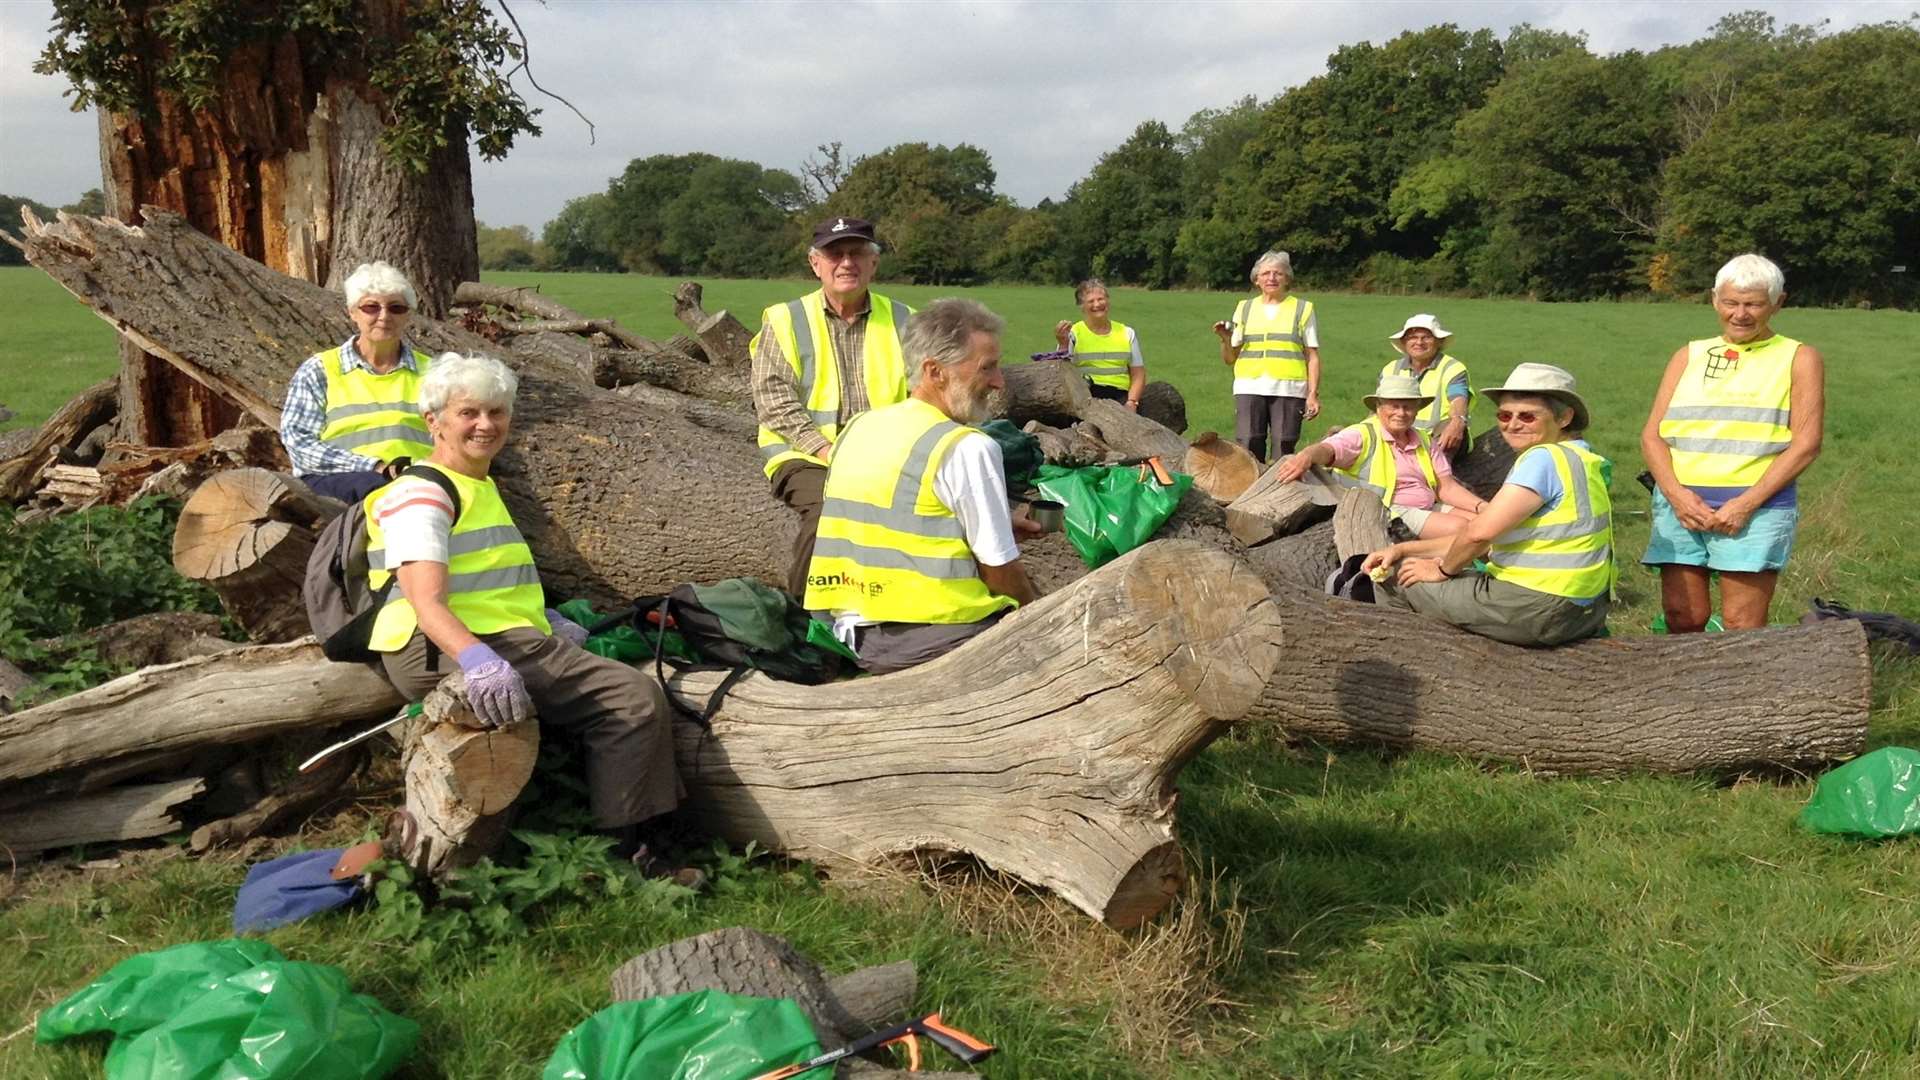 Members of the U3A group make the most of the ‘natural’ bench and take a breather during their three mile litter-pick.